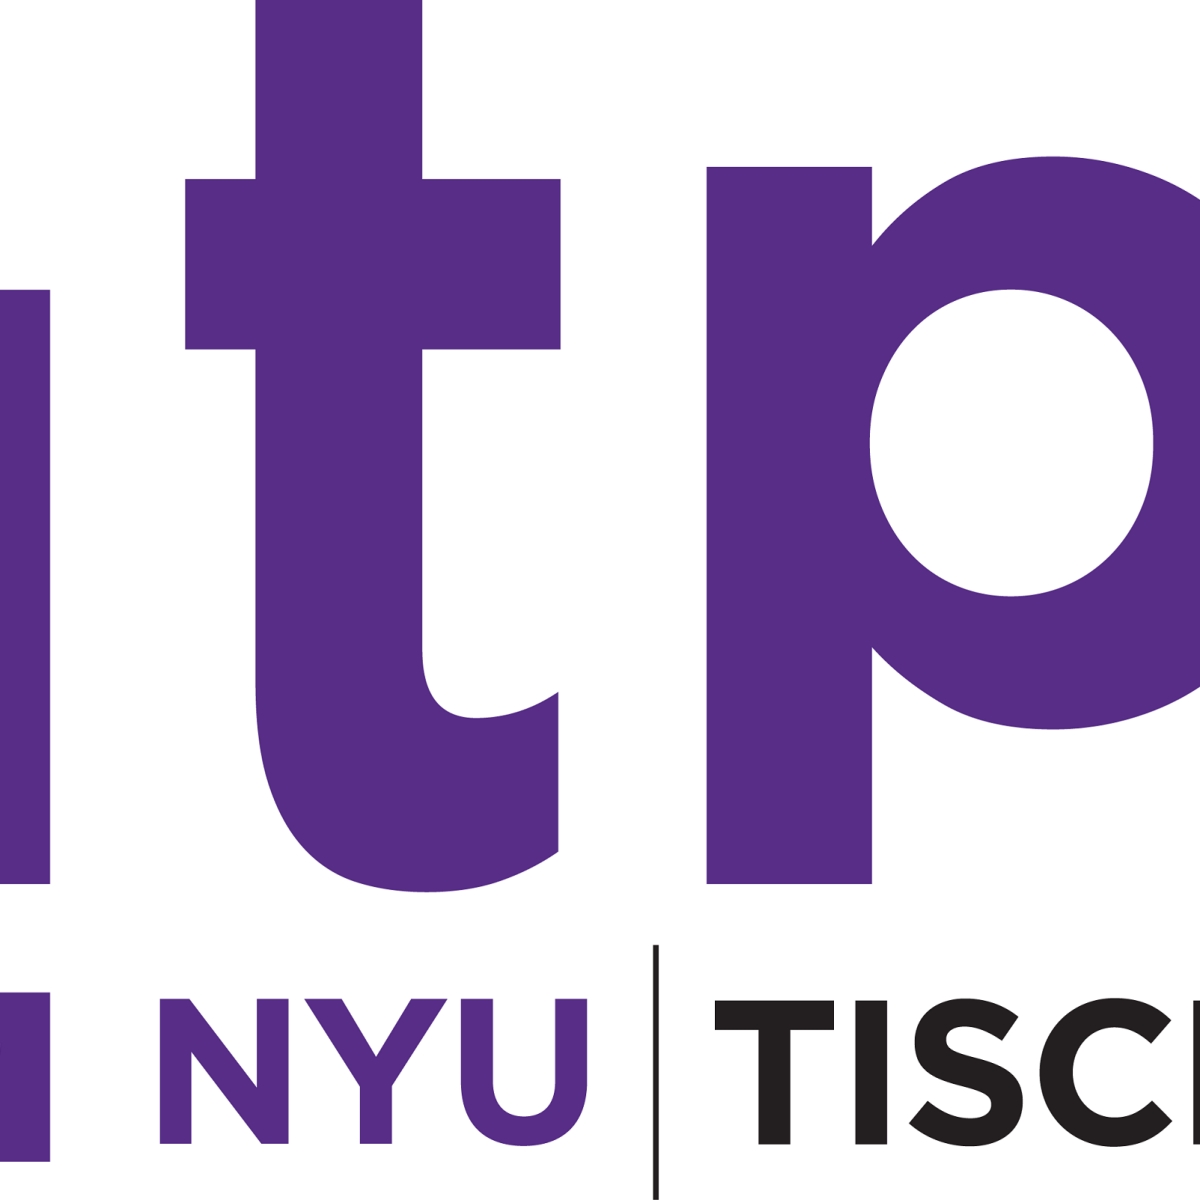 ITP logo in purple and black against a white background.